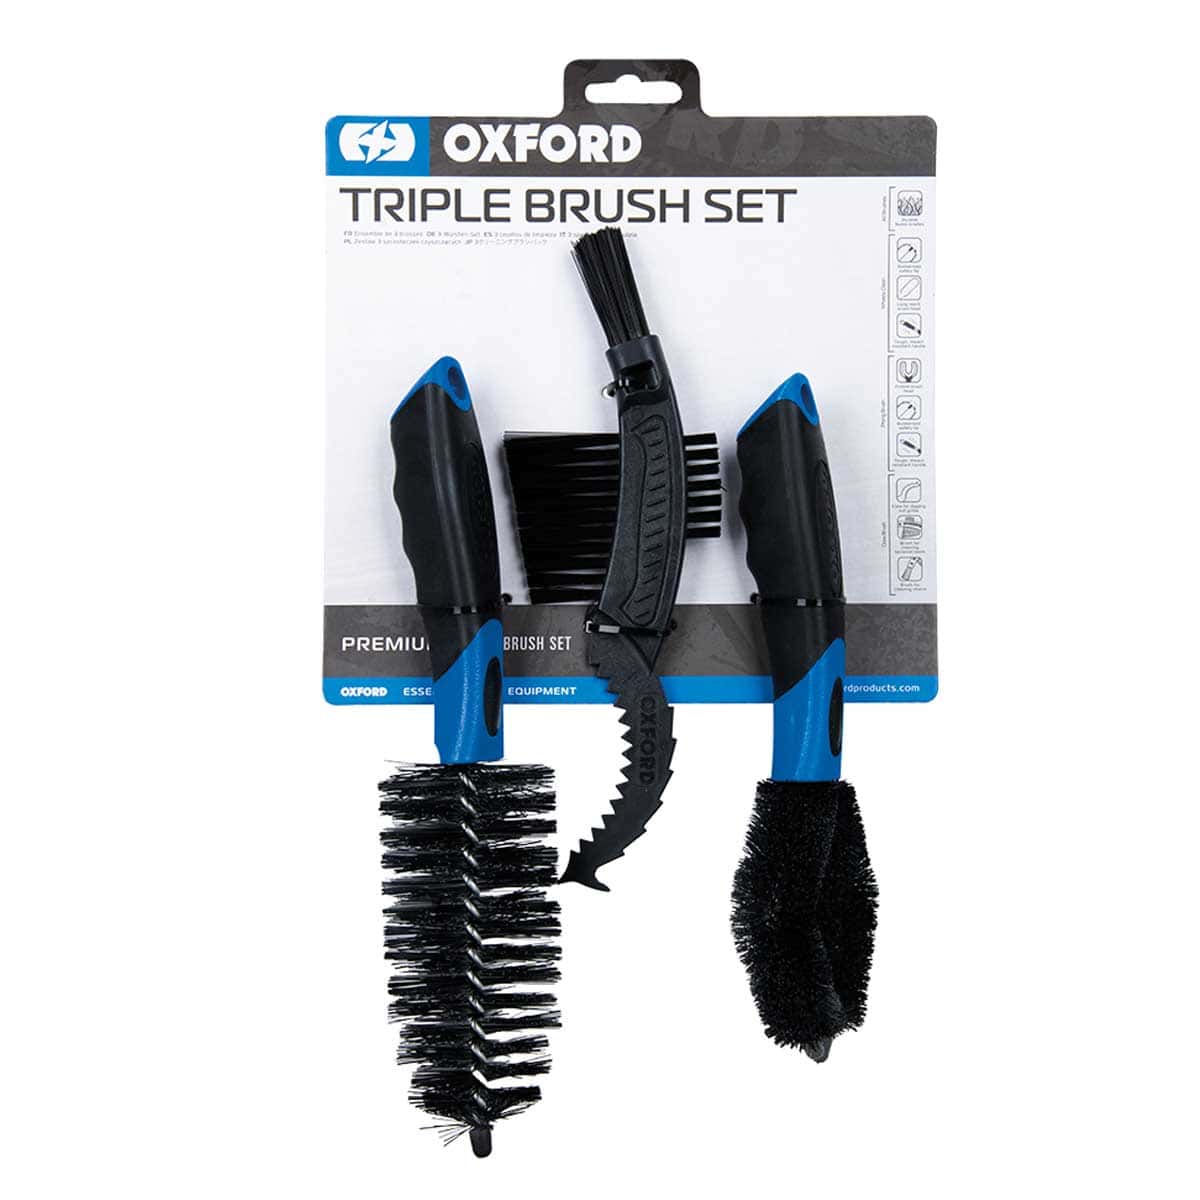 The Oxford Triple Brush Set: Next level cleaning brushes to speed up cleaning your bike - packaging